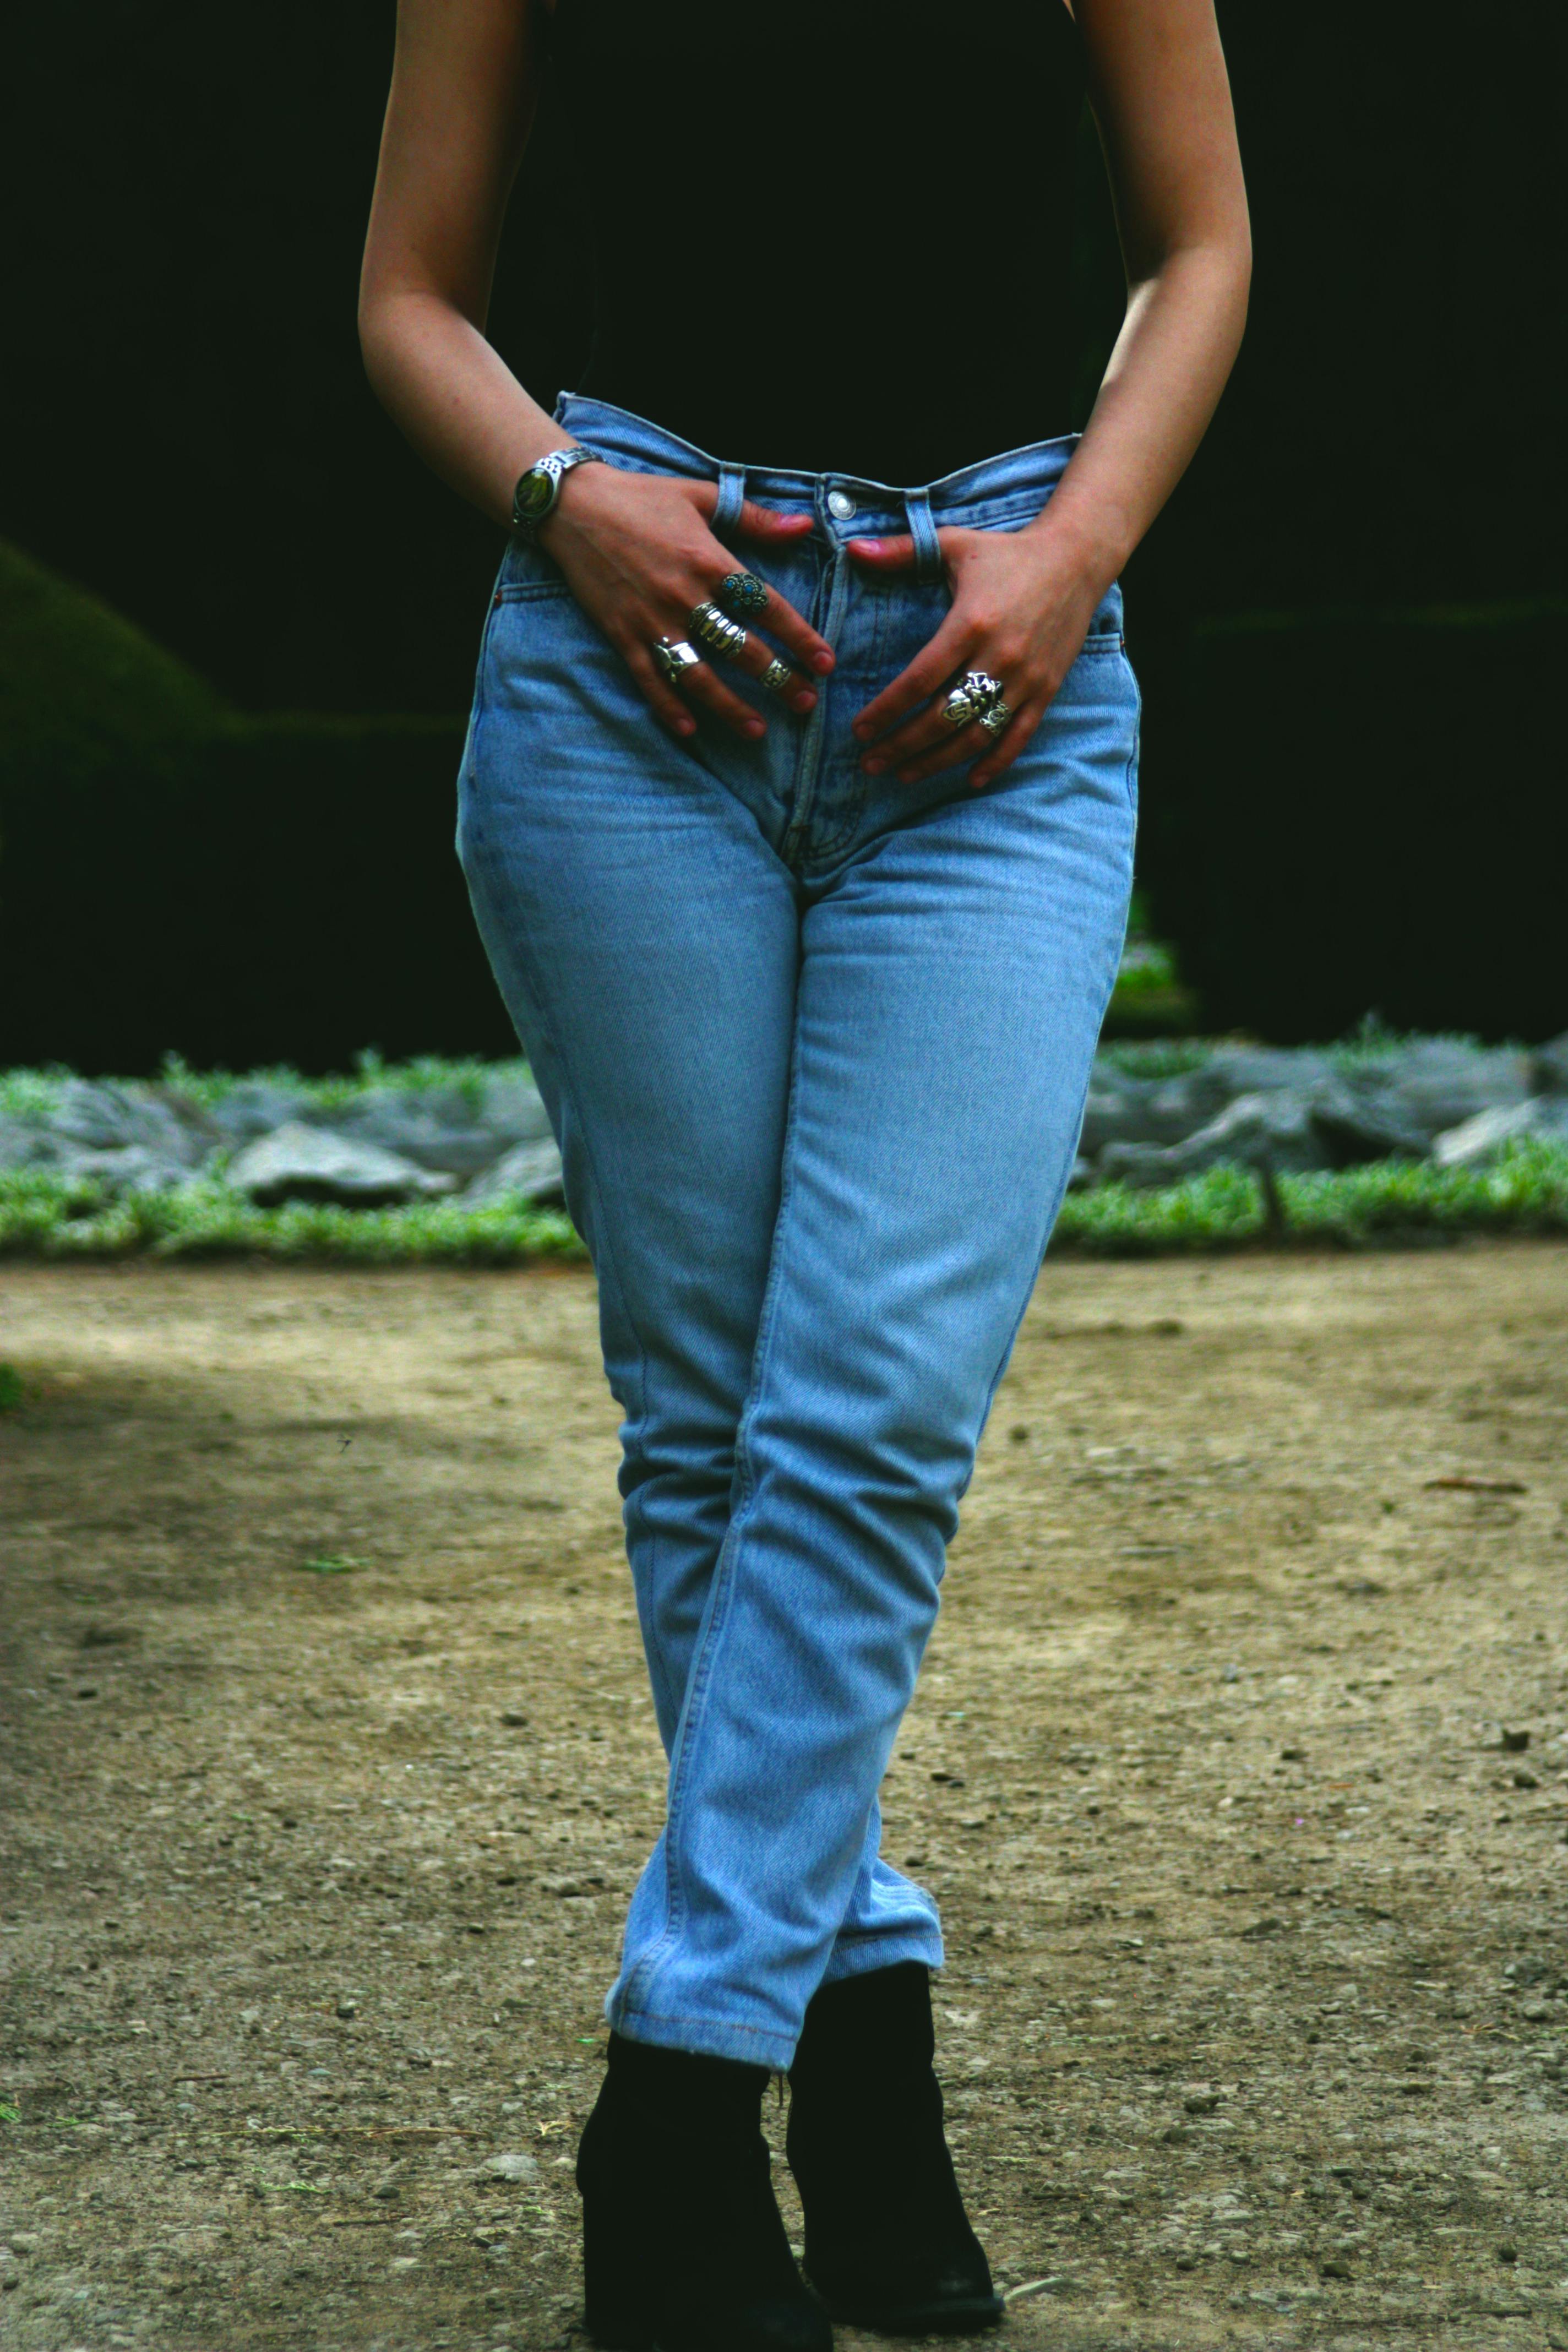 A woman wearing a pair of blue jeans | Source: Pexels